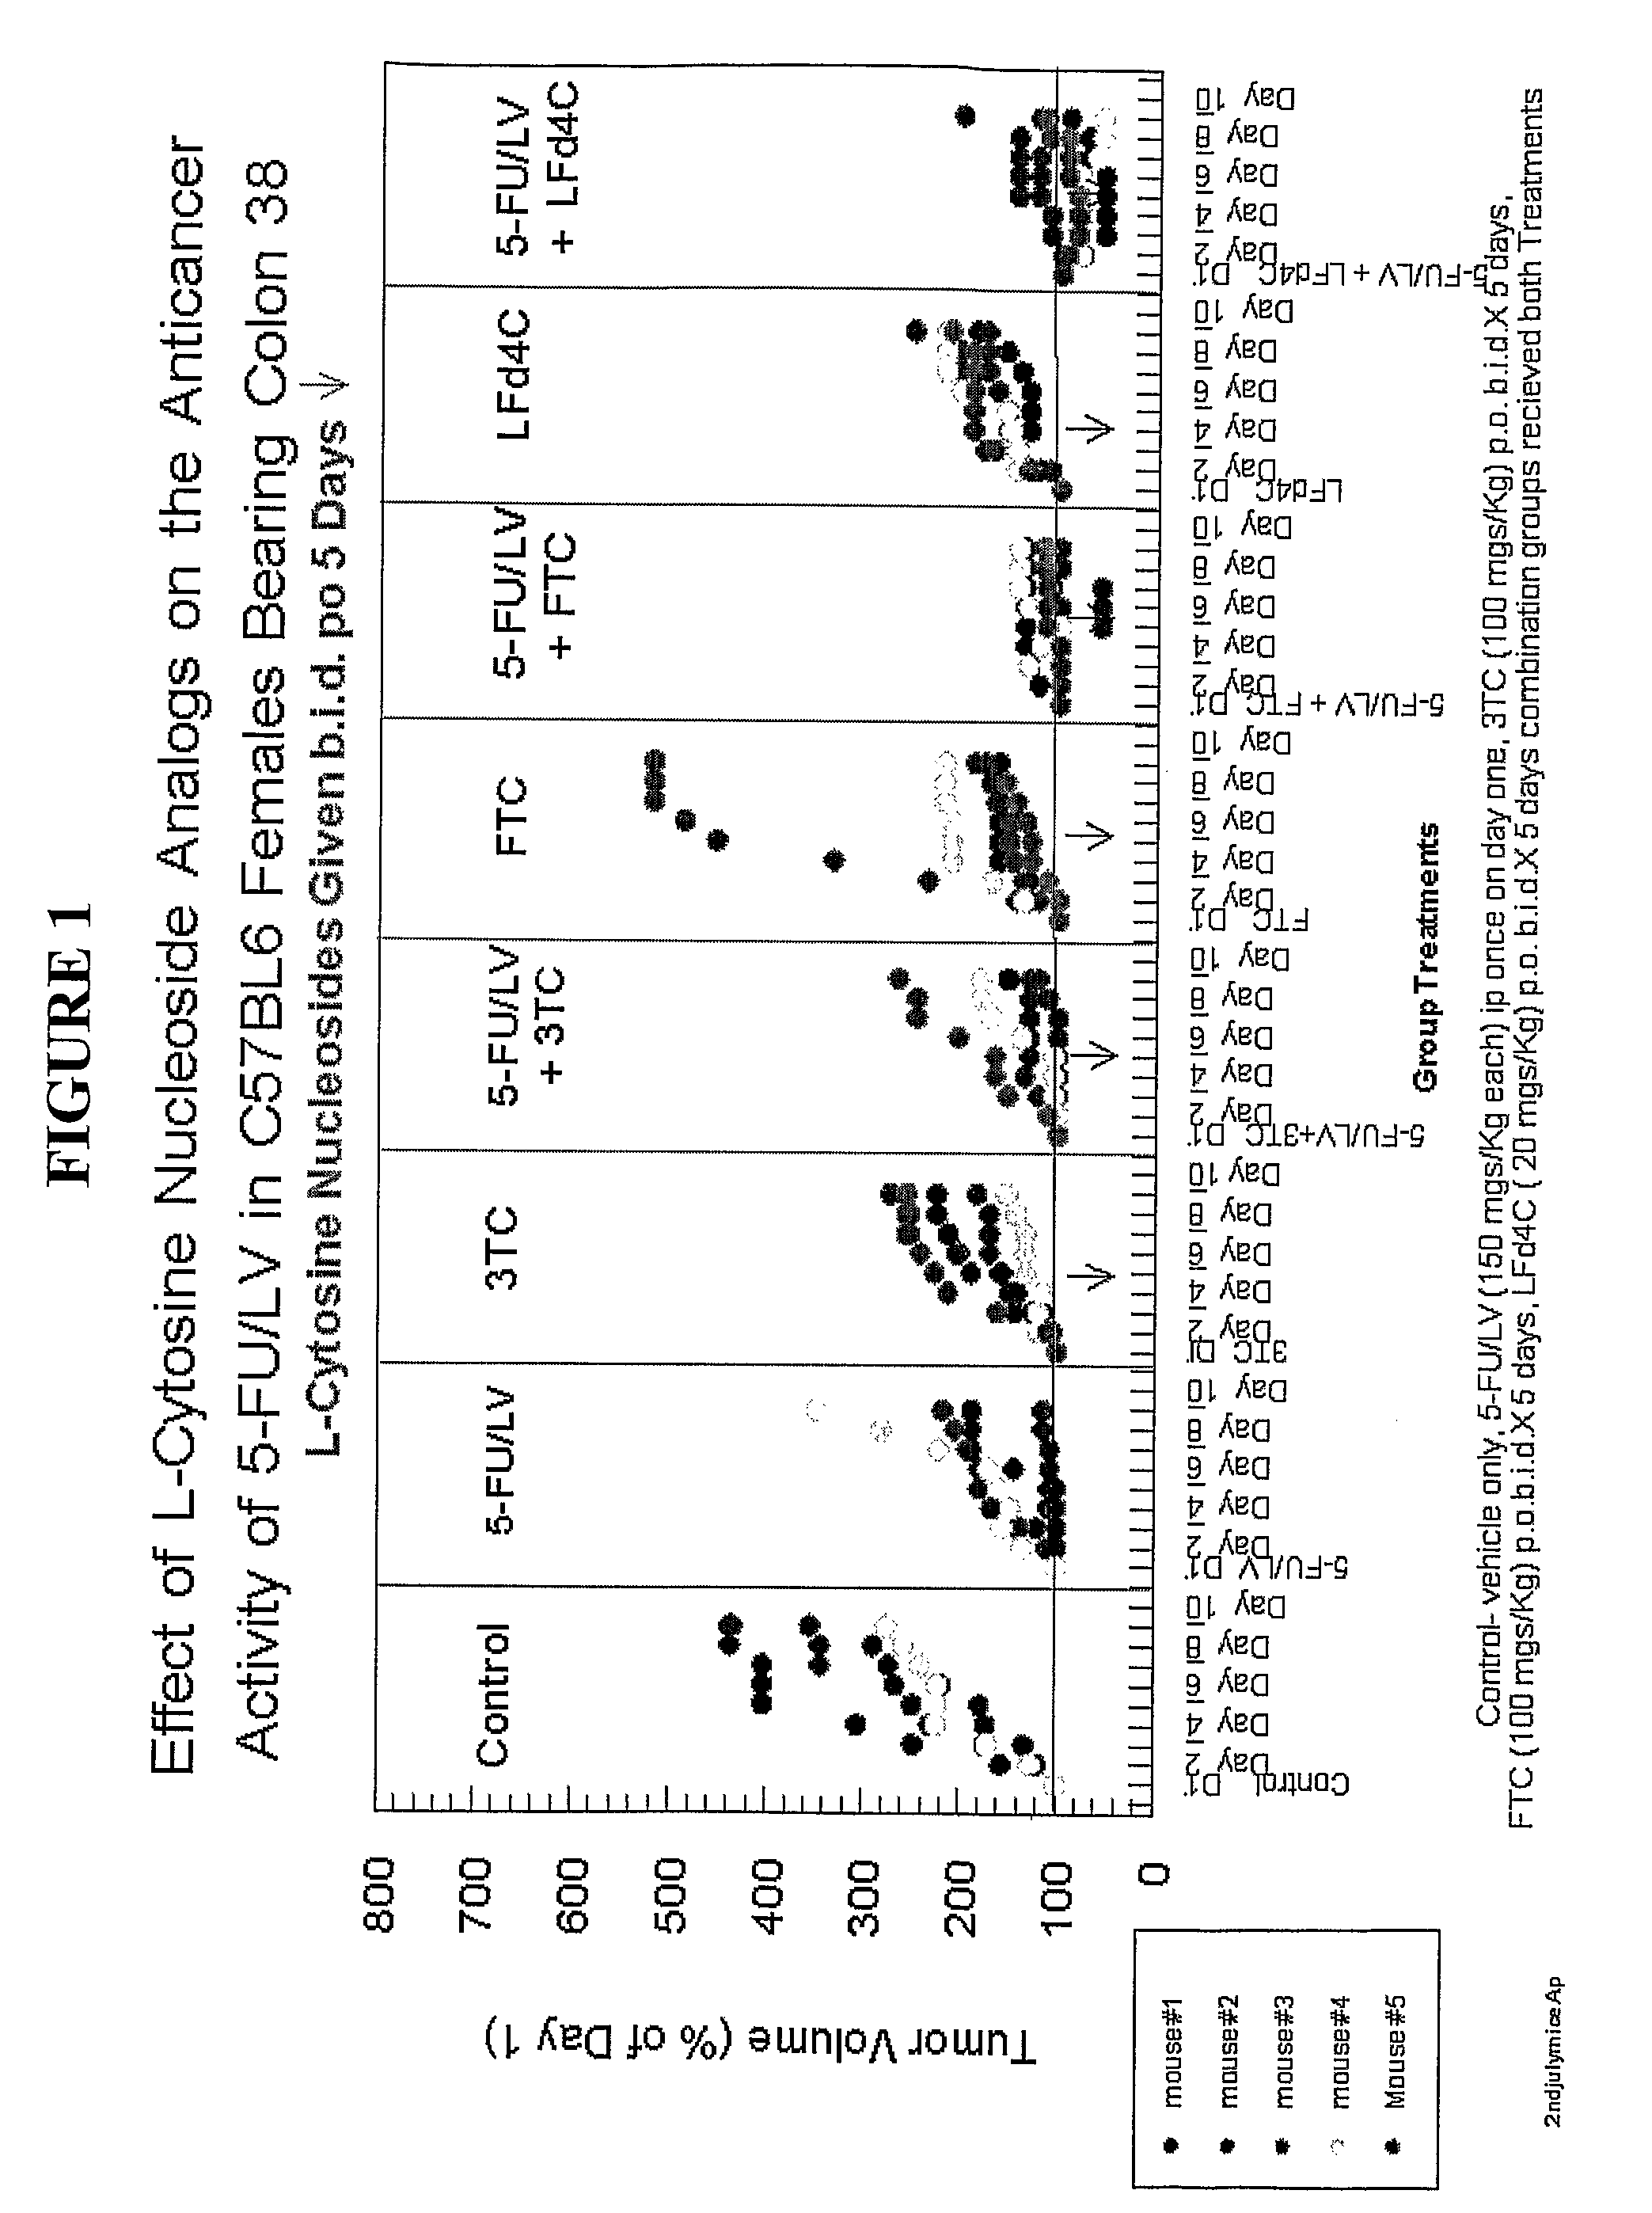 Method of treating cancer and other conditions or disease states using L-cytosine nucleoside analogs